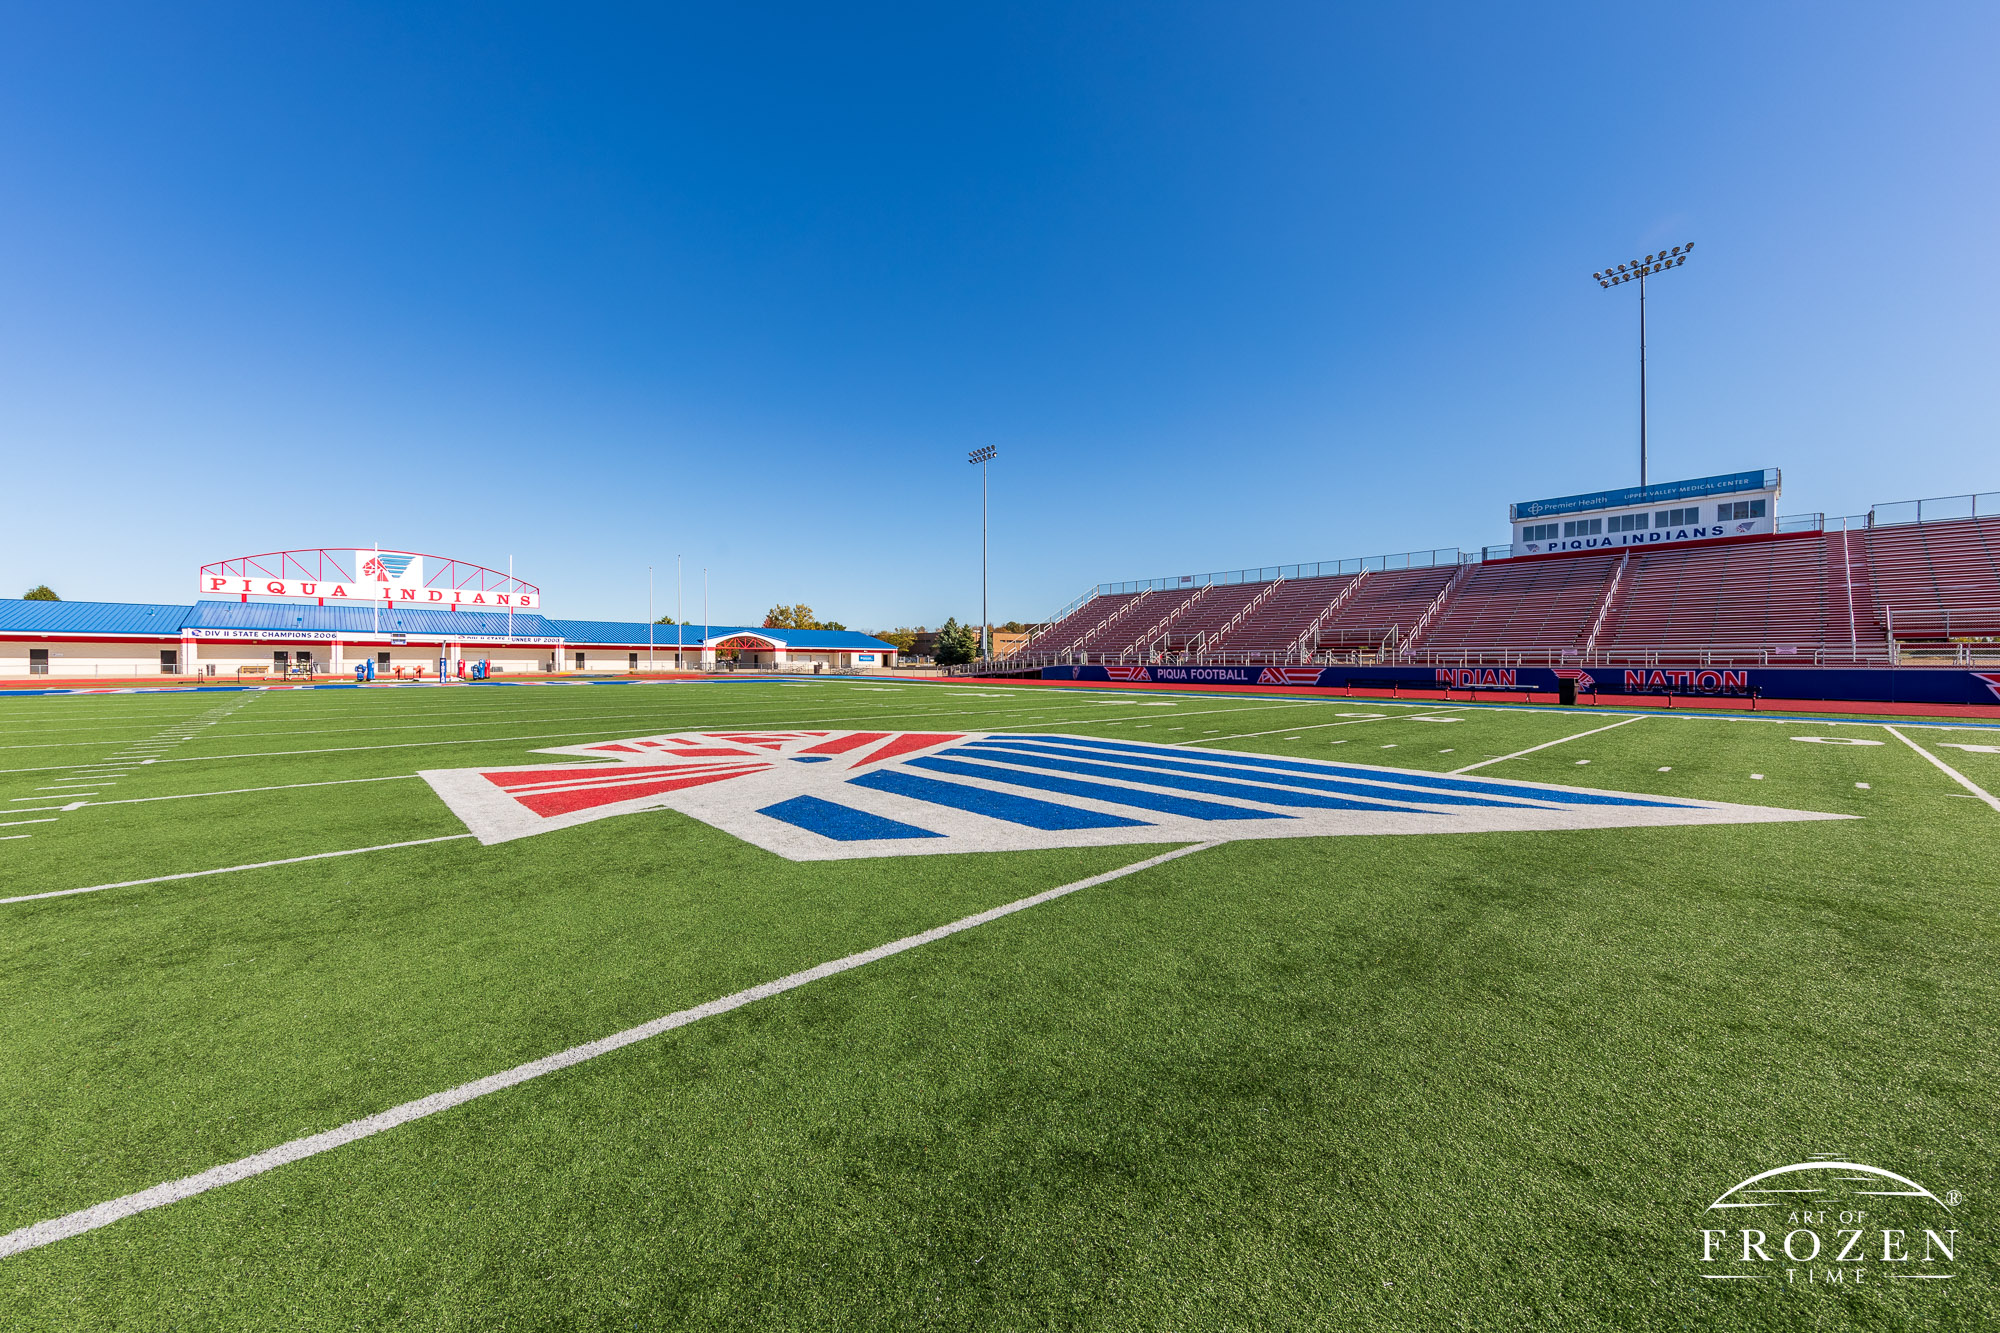 The Piqua Ohio High School Stadium is an impressive facility with AstroTurf which displays bright red and blue colors under clear blue Miami County Ohio skies